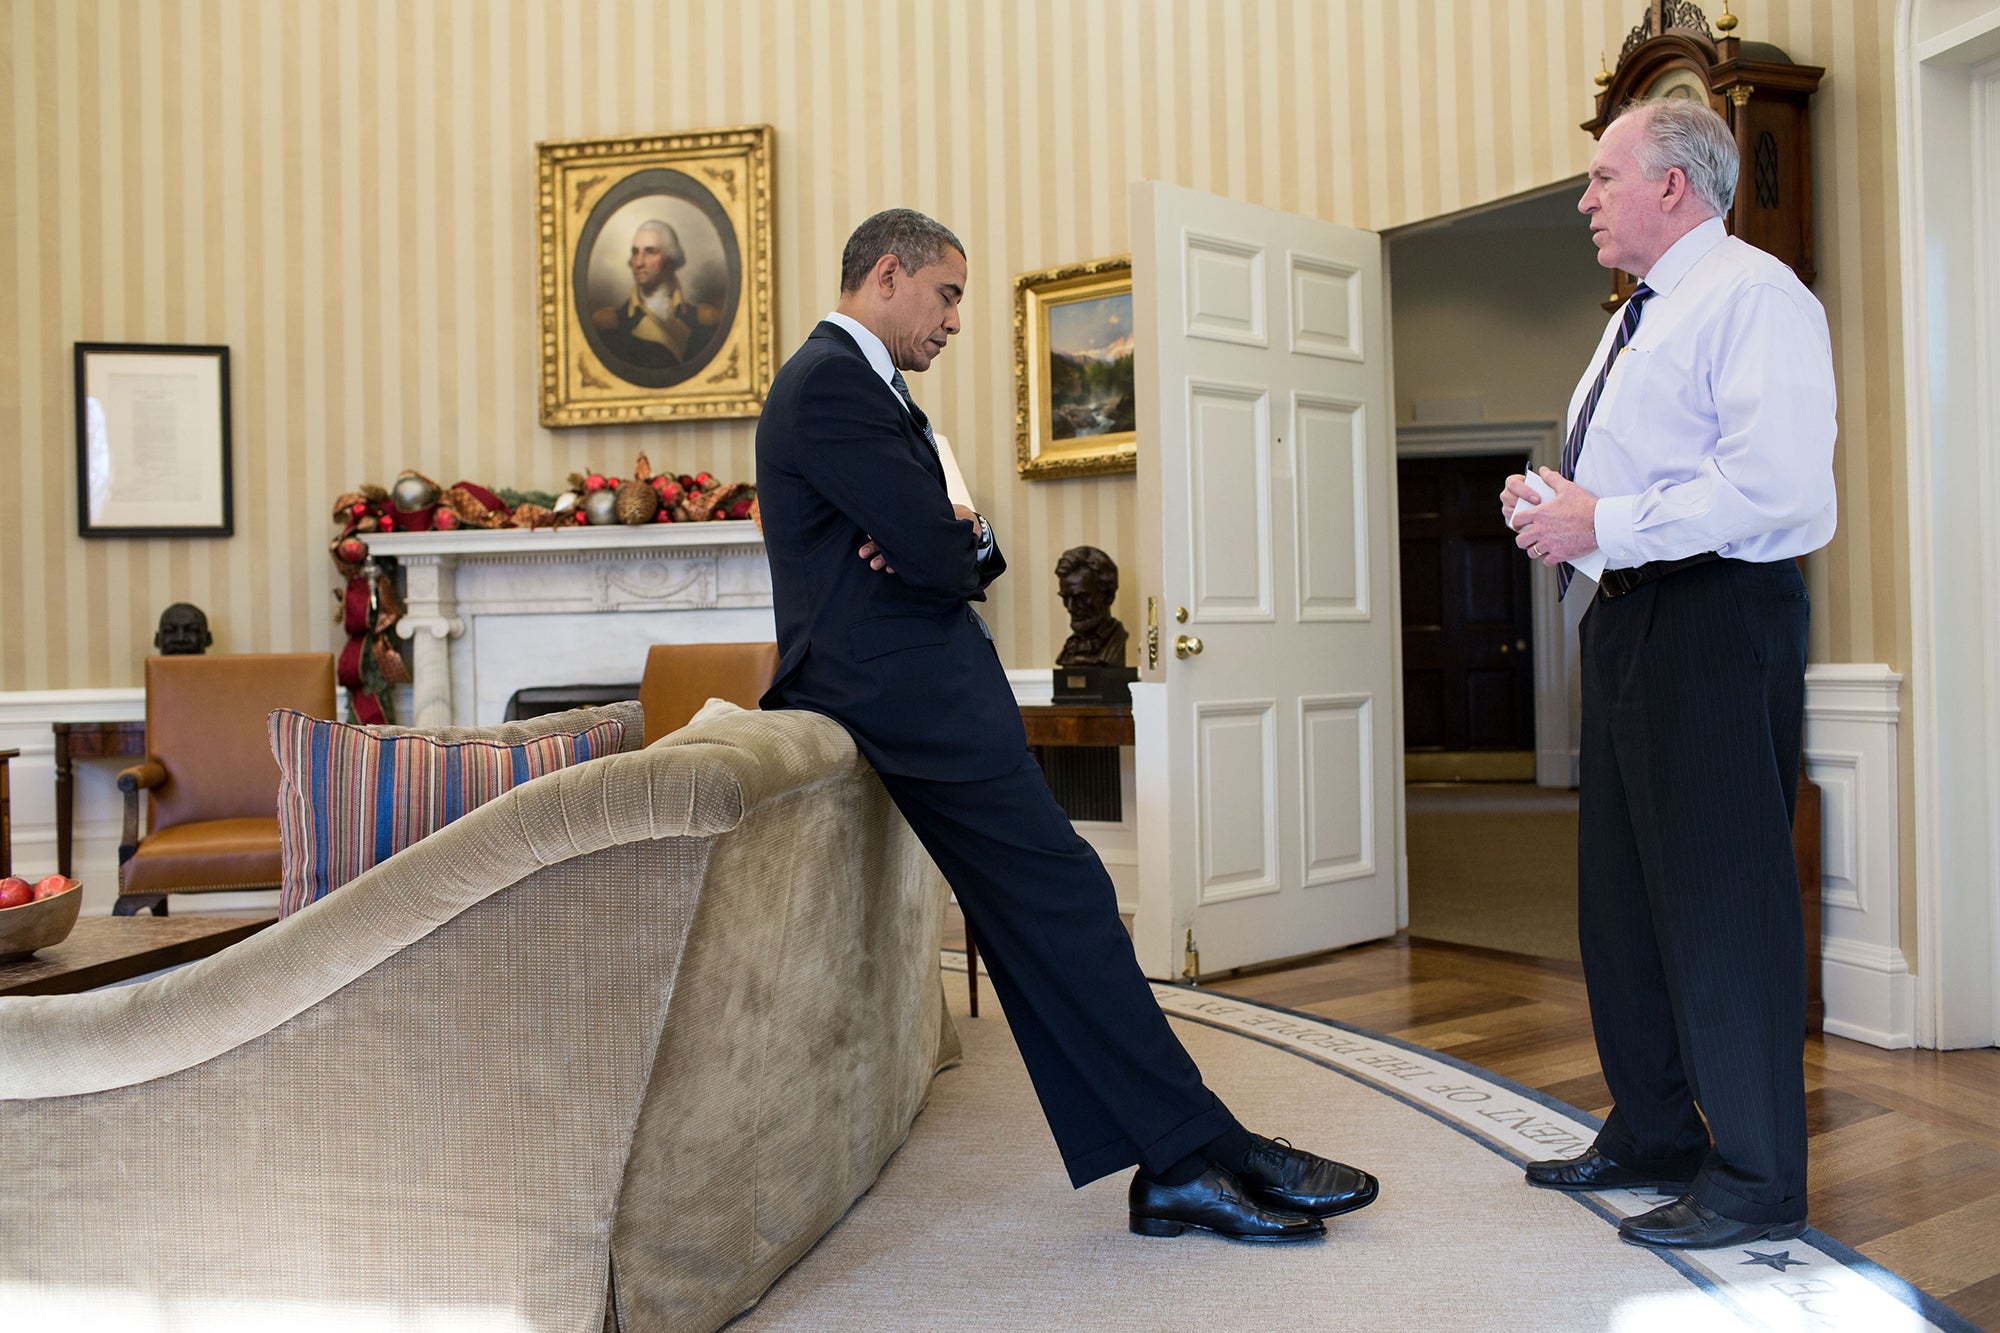 Former W.H. Photographer Reveals Never-Before-Seen Photos of Obama’s Anguish After Sandy Hook